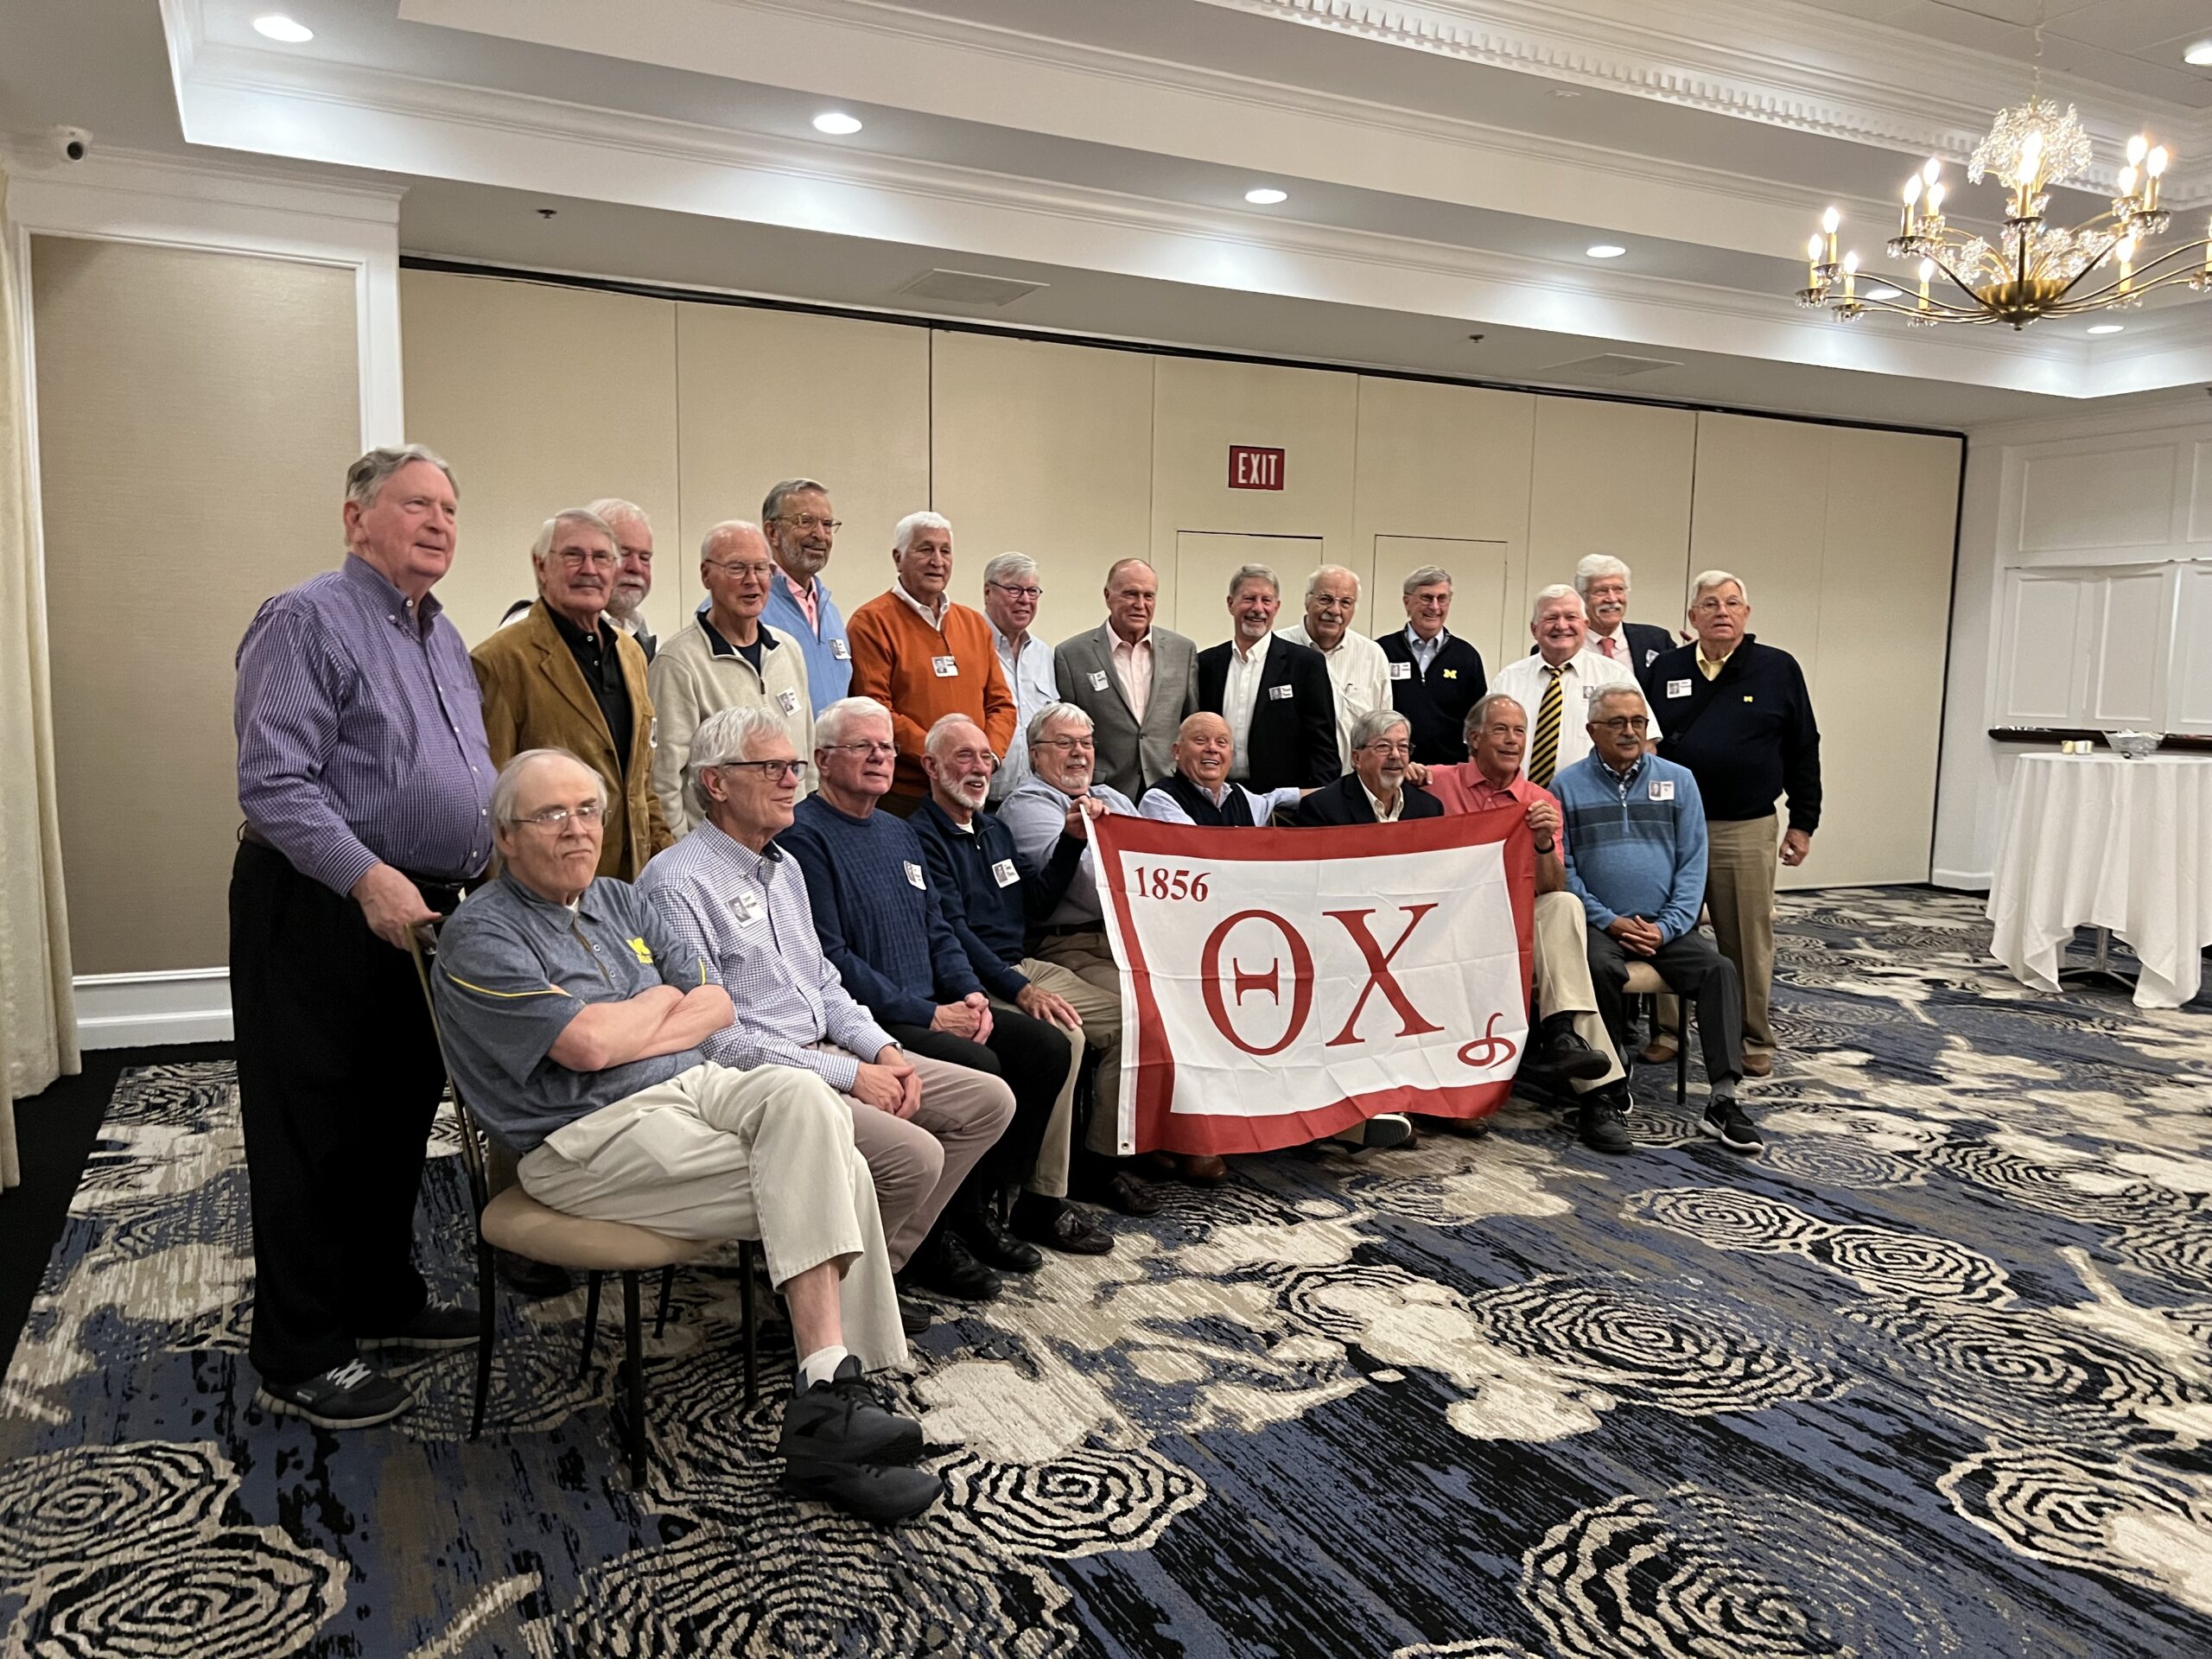 Following a period of pandemic disruptions, William L. Diefenbach, ’72 (front row, second from right), joined his fraternity brothers from the Alpha Gamma chapter of Theta Chi for a homecoming dinner reunion in Ann Arbor.